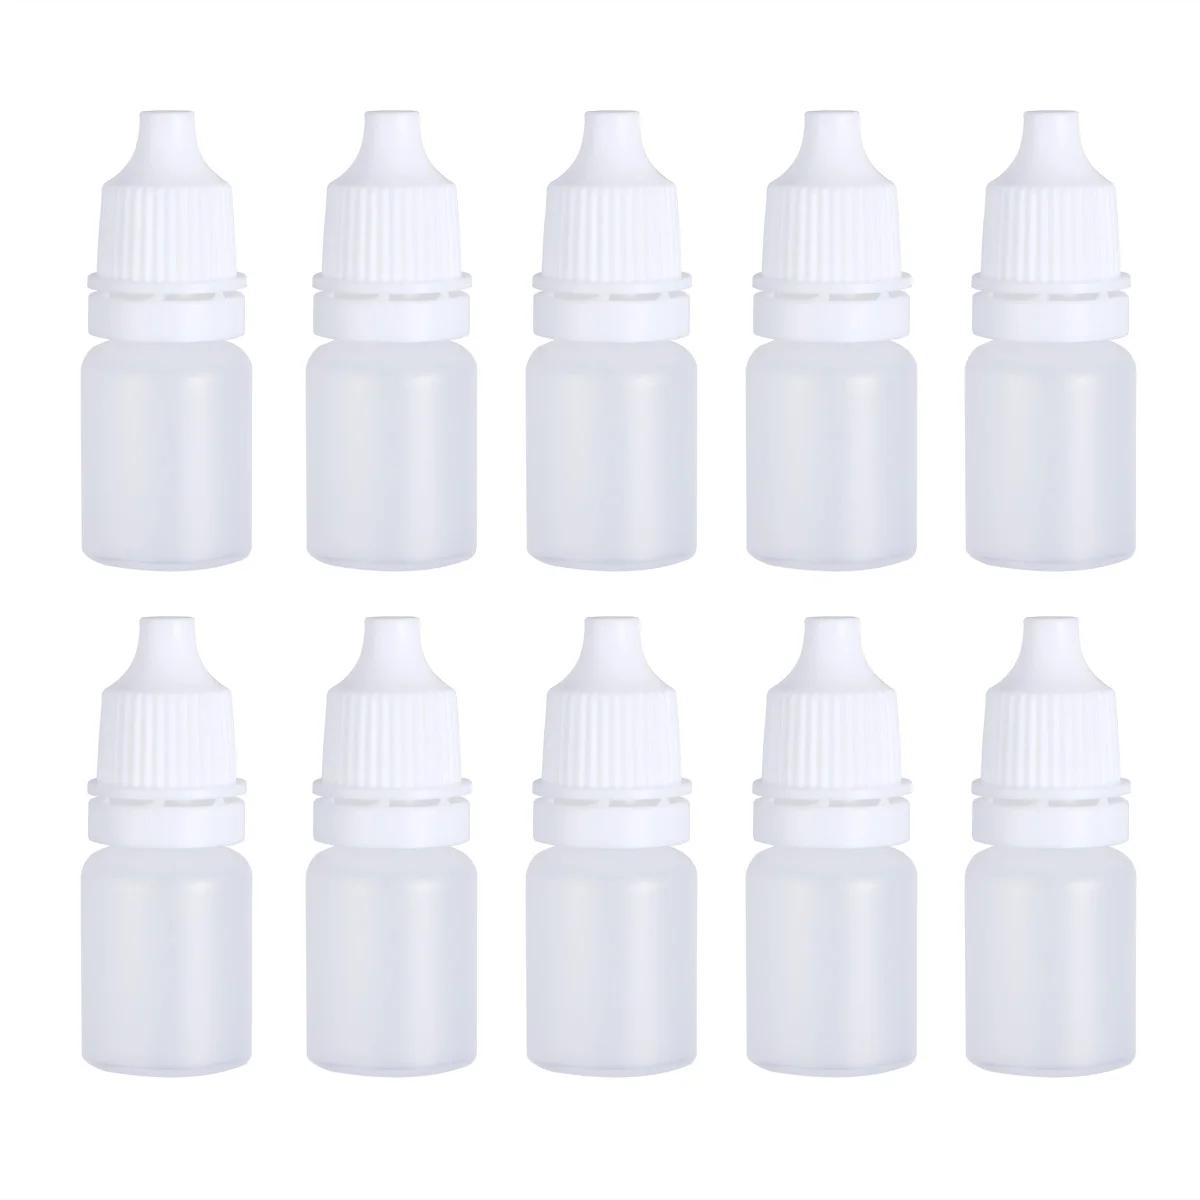 

10Pcs Squeezable Dropper Bottles 5ml Empty Eye Dropper Bottle Eye Dropping Bottles Portable Eye Drops Containers Dispenser for